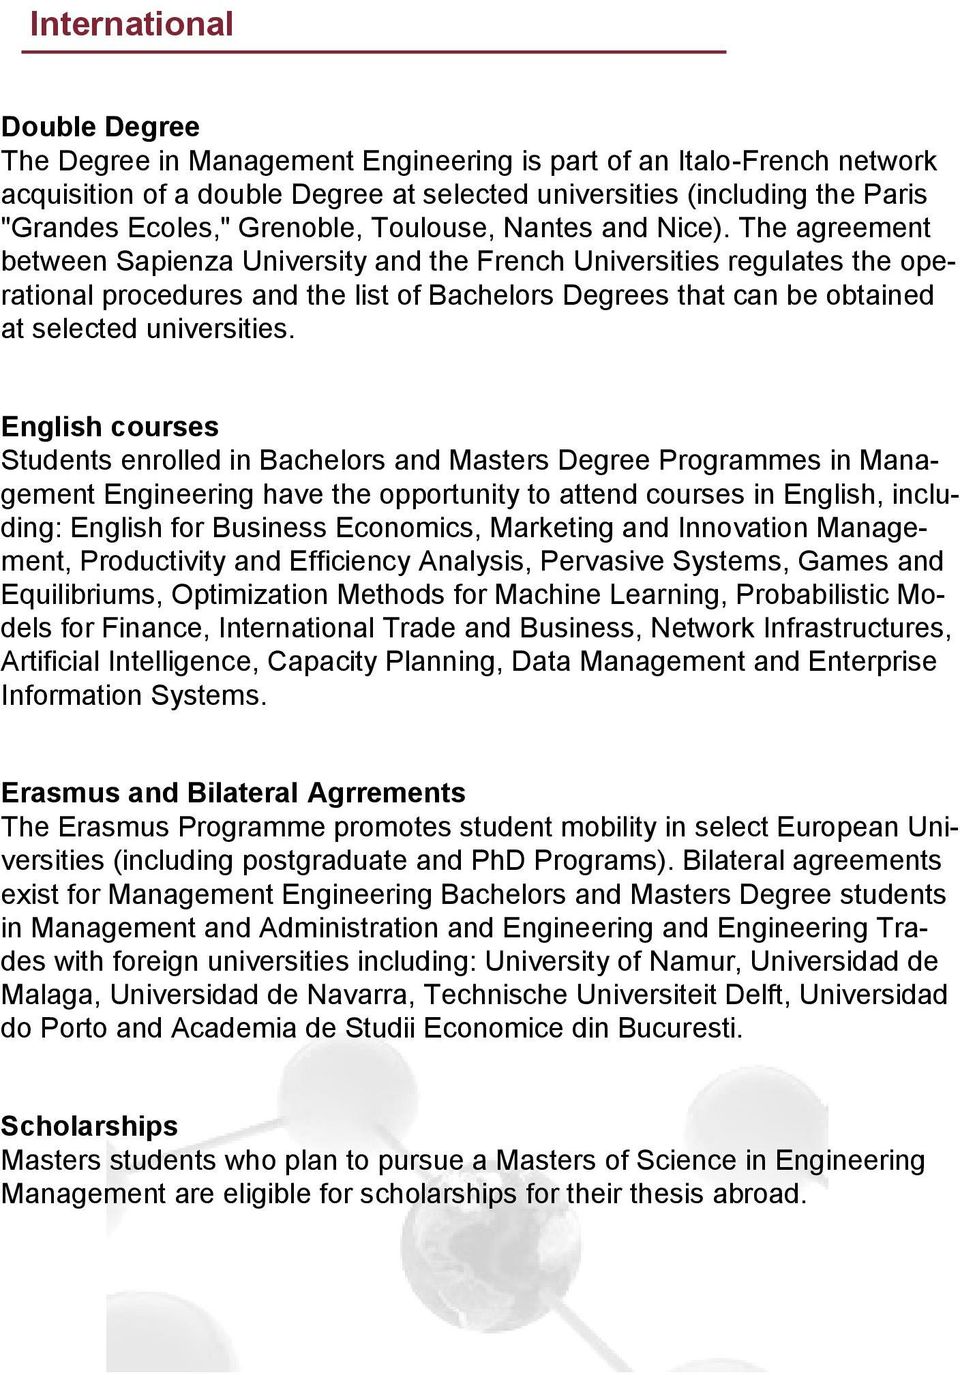 The agreement between Sapienza University and the French Universities regulates the operational procedures and the list of Bachelors Degrees that can be obtained at selected universities.